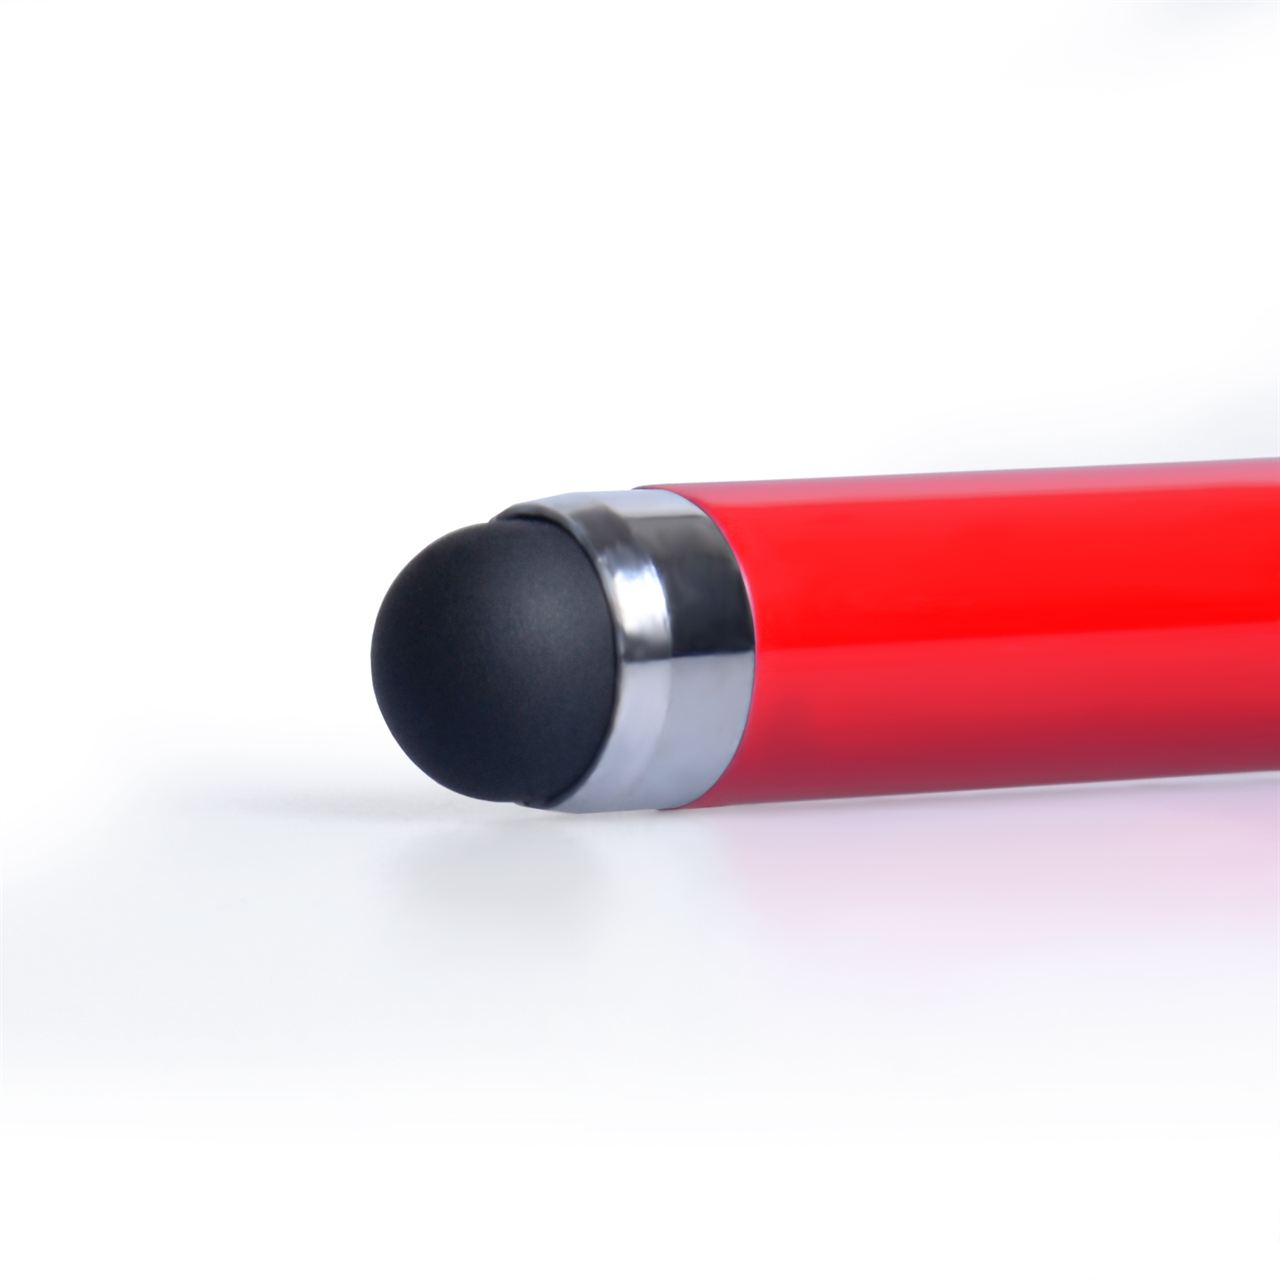 YouSave Accessories Stylus Pen Red